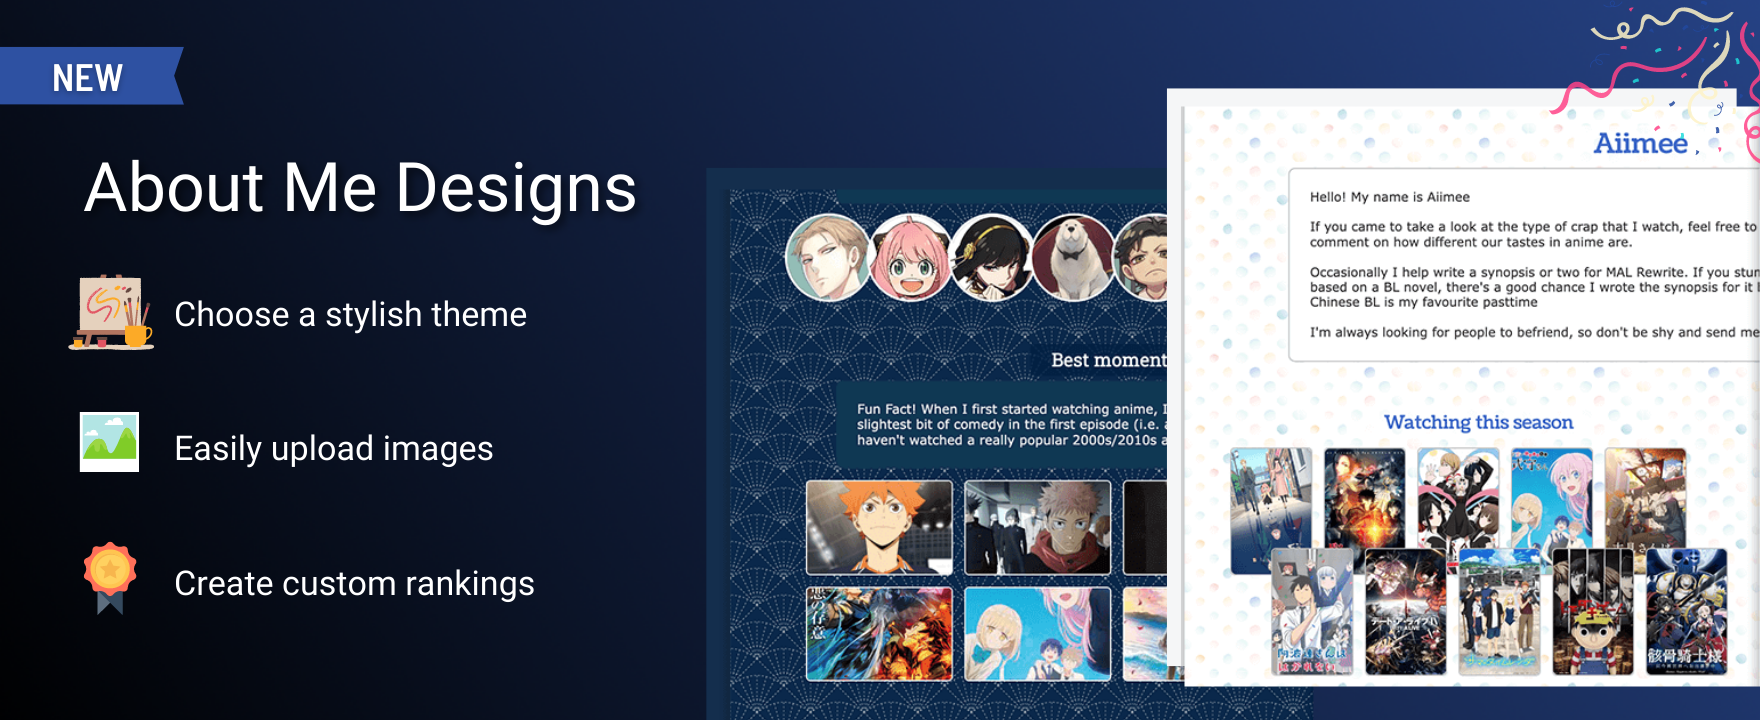 Update Jun 30] New About Me Designs for Your Profile! - Forums - MyAnimeList .net